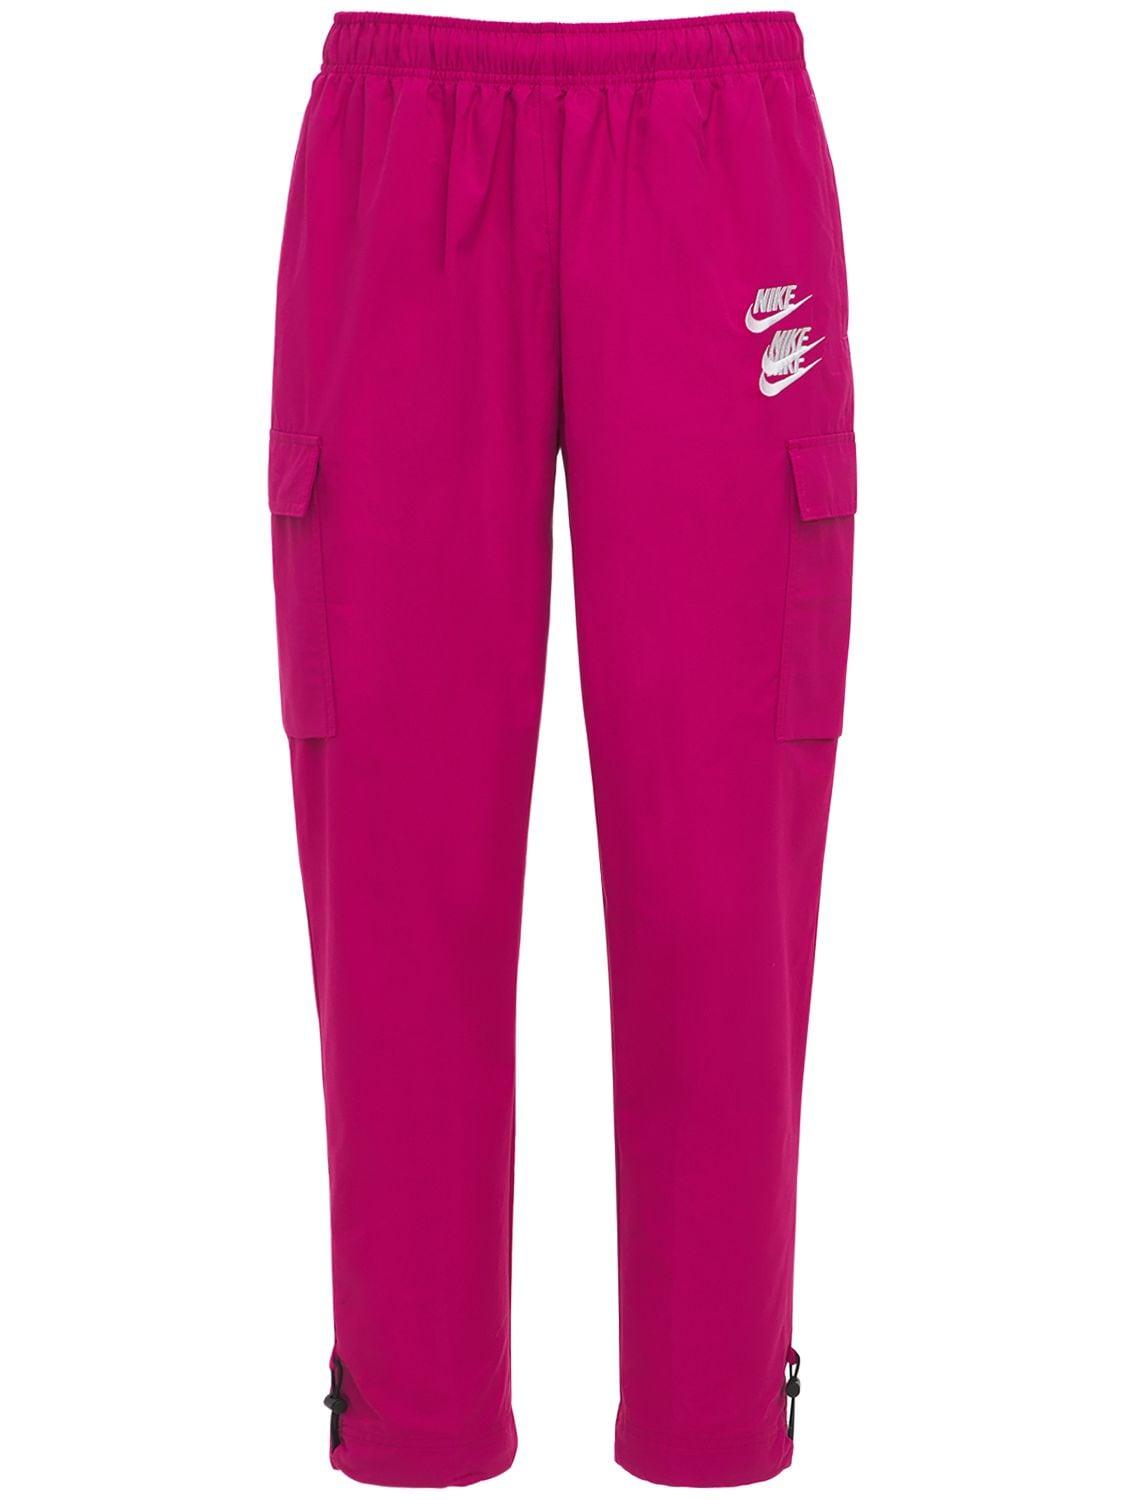 Supersports Vietnam Official, Women's Nike Woven Trousers Joggers - Pink